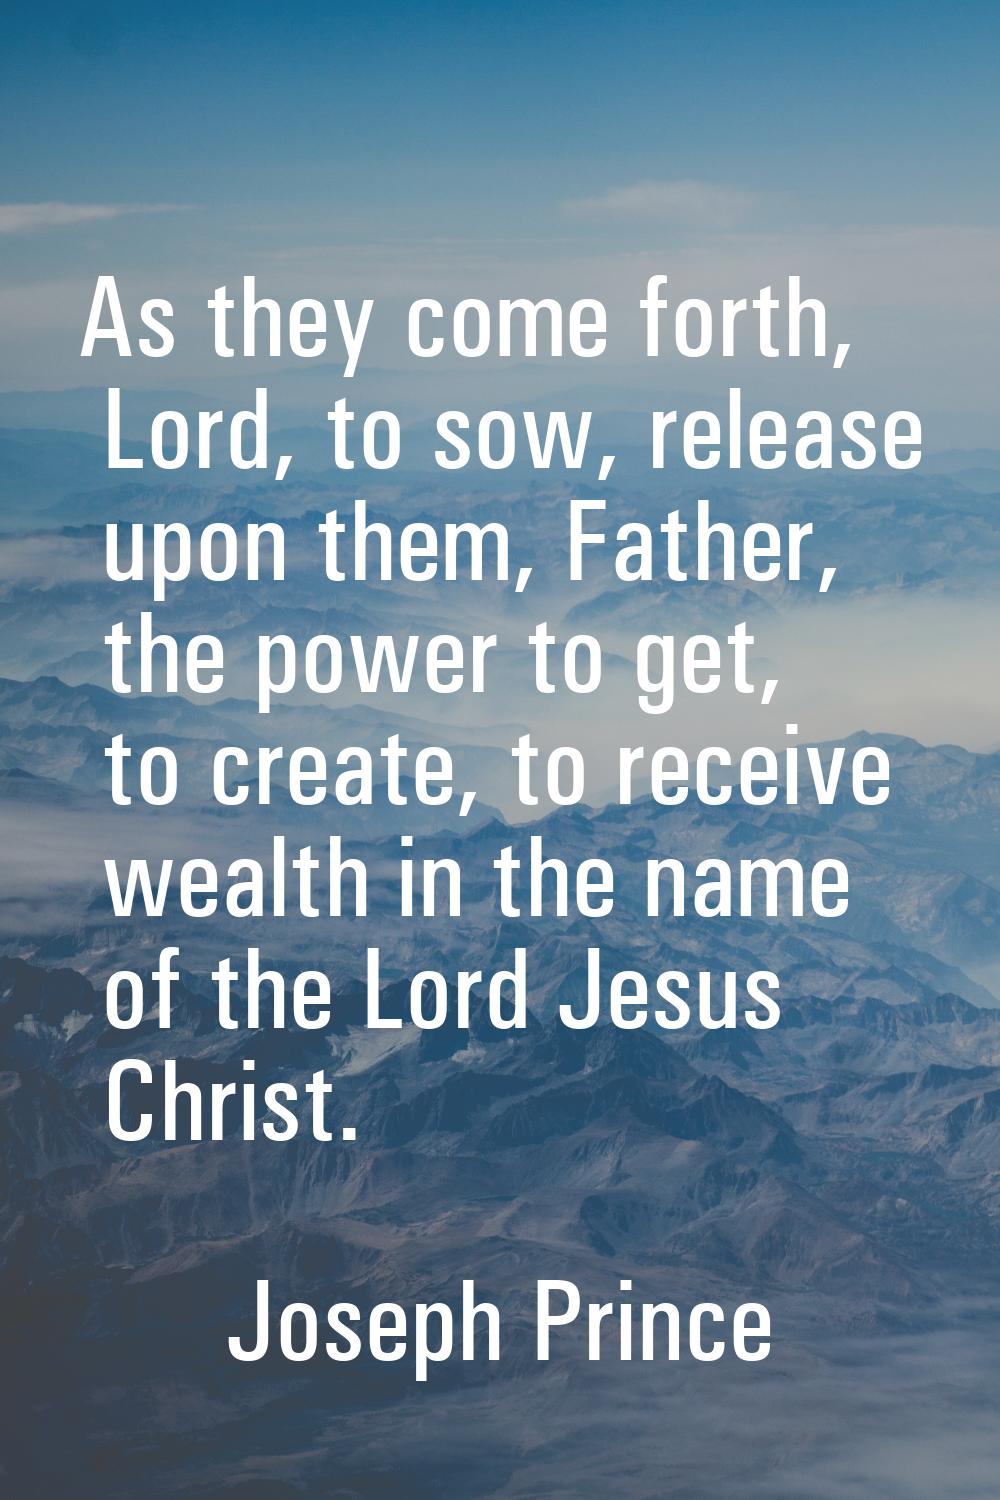 As they come forth, Lord, to sow, release upon them, Father, the power to get, to create, to receiv